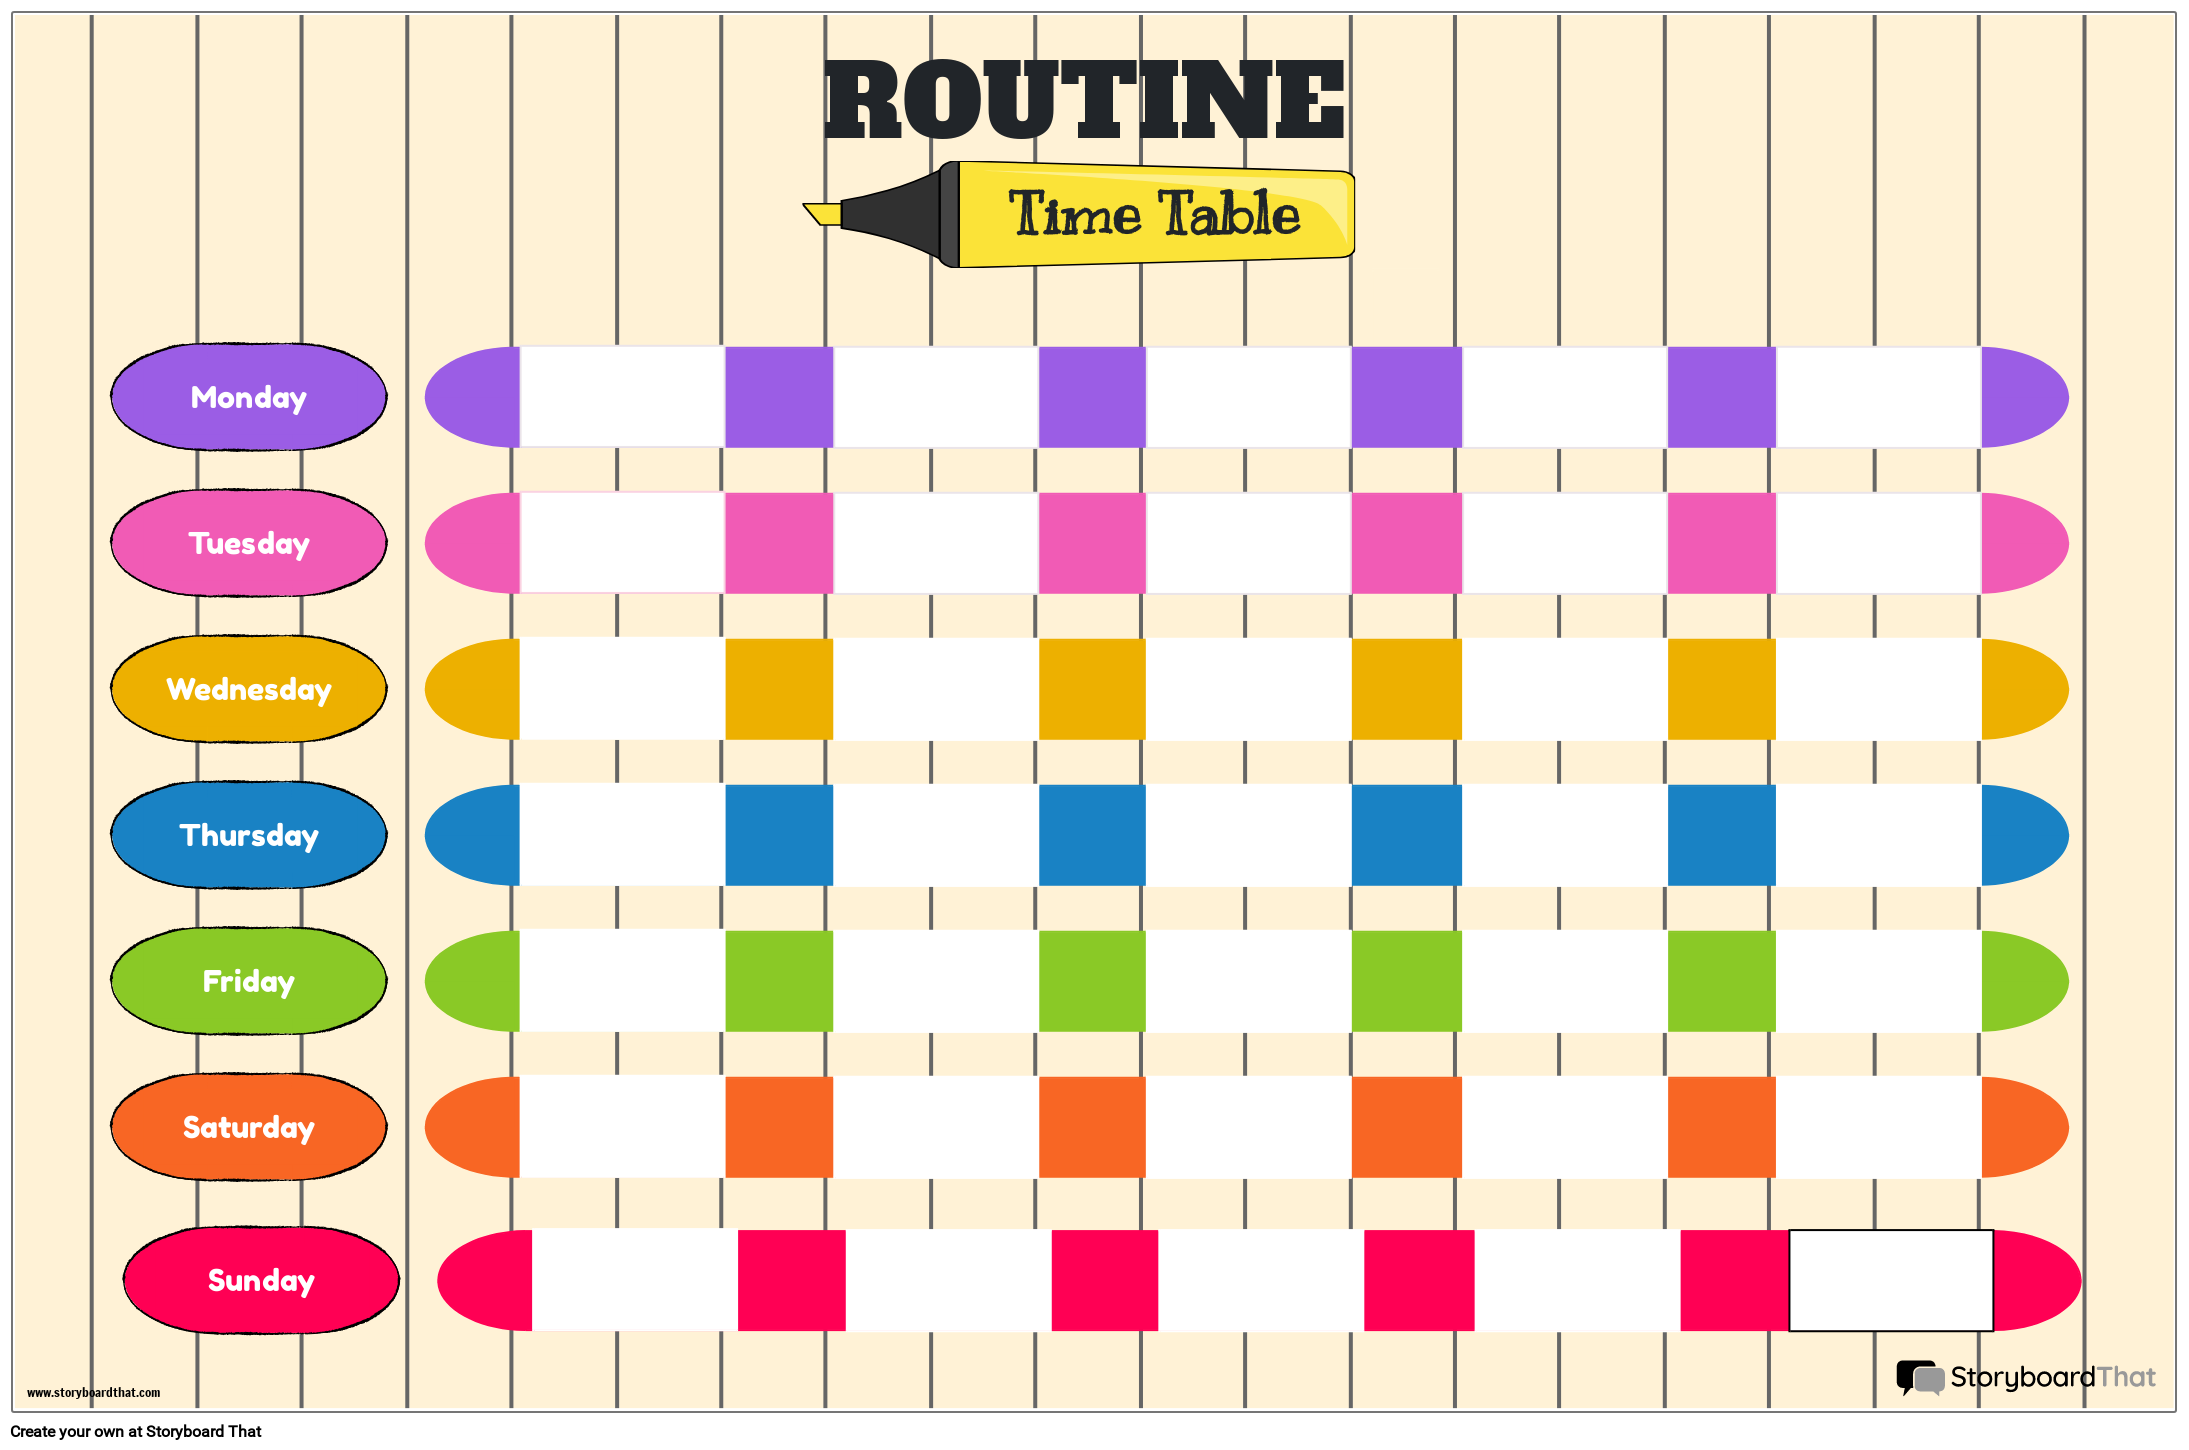 Routine Time Table Template